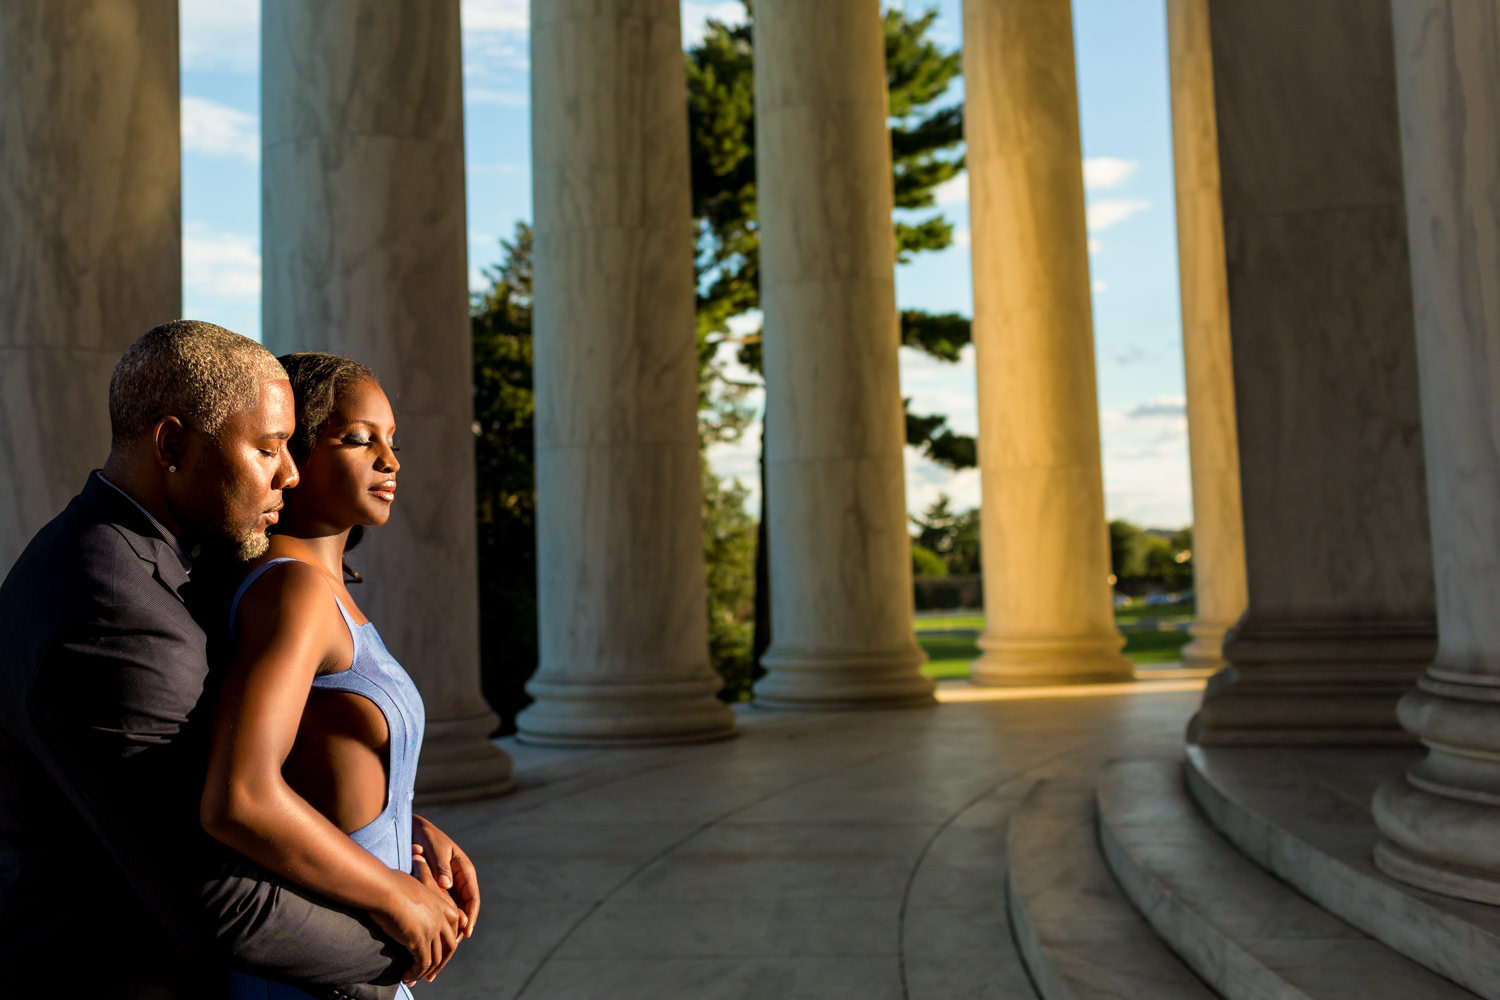 black couple at the Jefferson Memorial, cut out bright blue long dress, golden hour photos, the guy is behind the gal and they are cuddling while the setting sun is kissing their faces, they are inside the columns and the sun is glowing in the background, Procopio Photography, best top Washington DC photographer, best top Maryland photographer, best top Virginia photographer, best top DMV photographer, best top wedding photographer, best top commercial photographer, best top portrait photographer, best top boudoir photographer, modern fine art portraits, dramatic, unique, different, bold, editorial, photojournalism, award winning photographer, published photographer, memorable images, be different, stand out, engagement photography